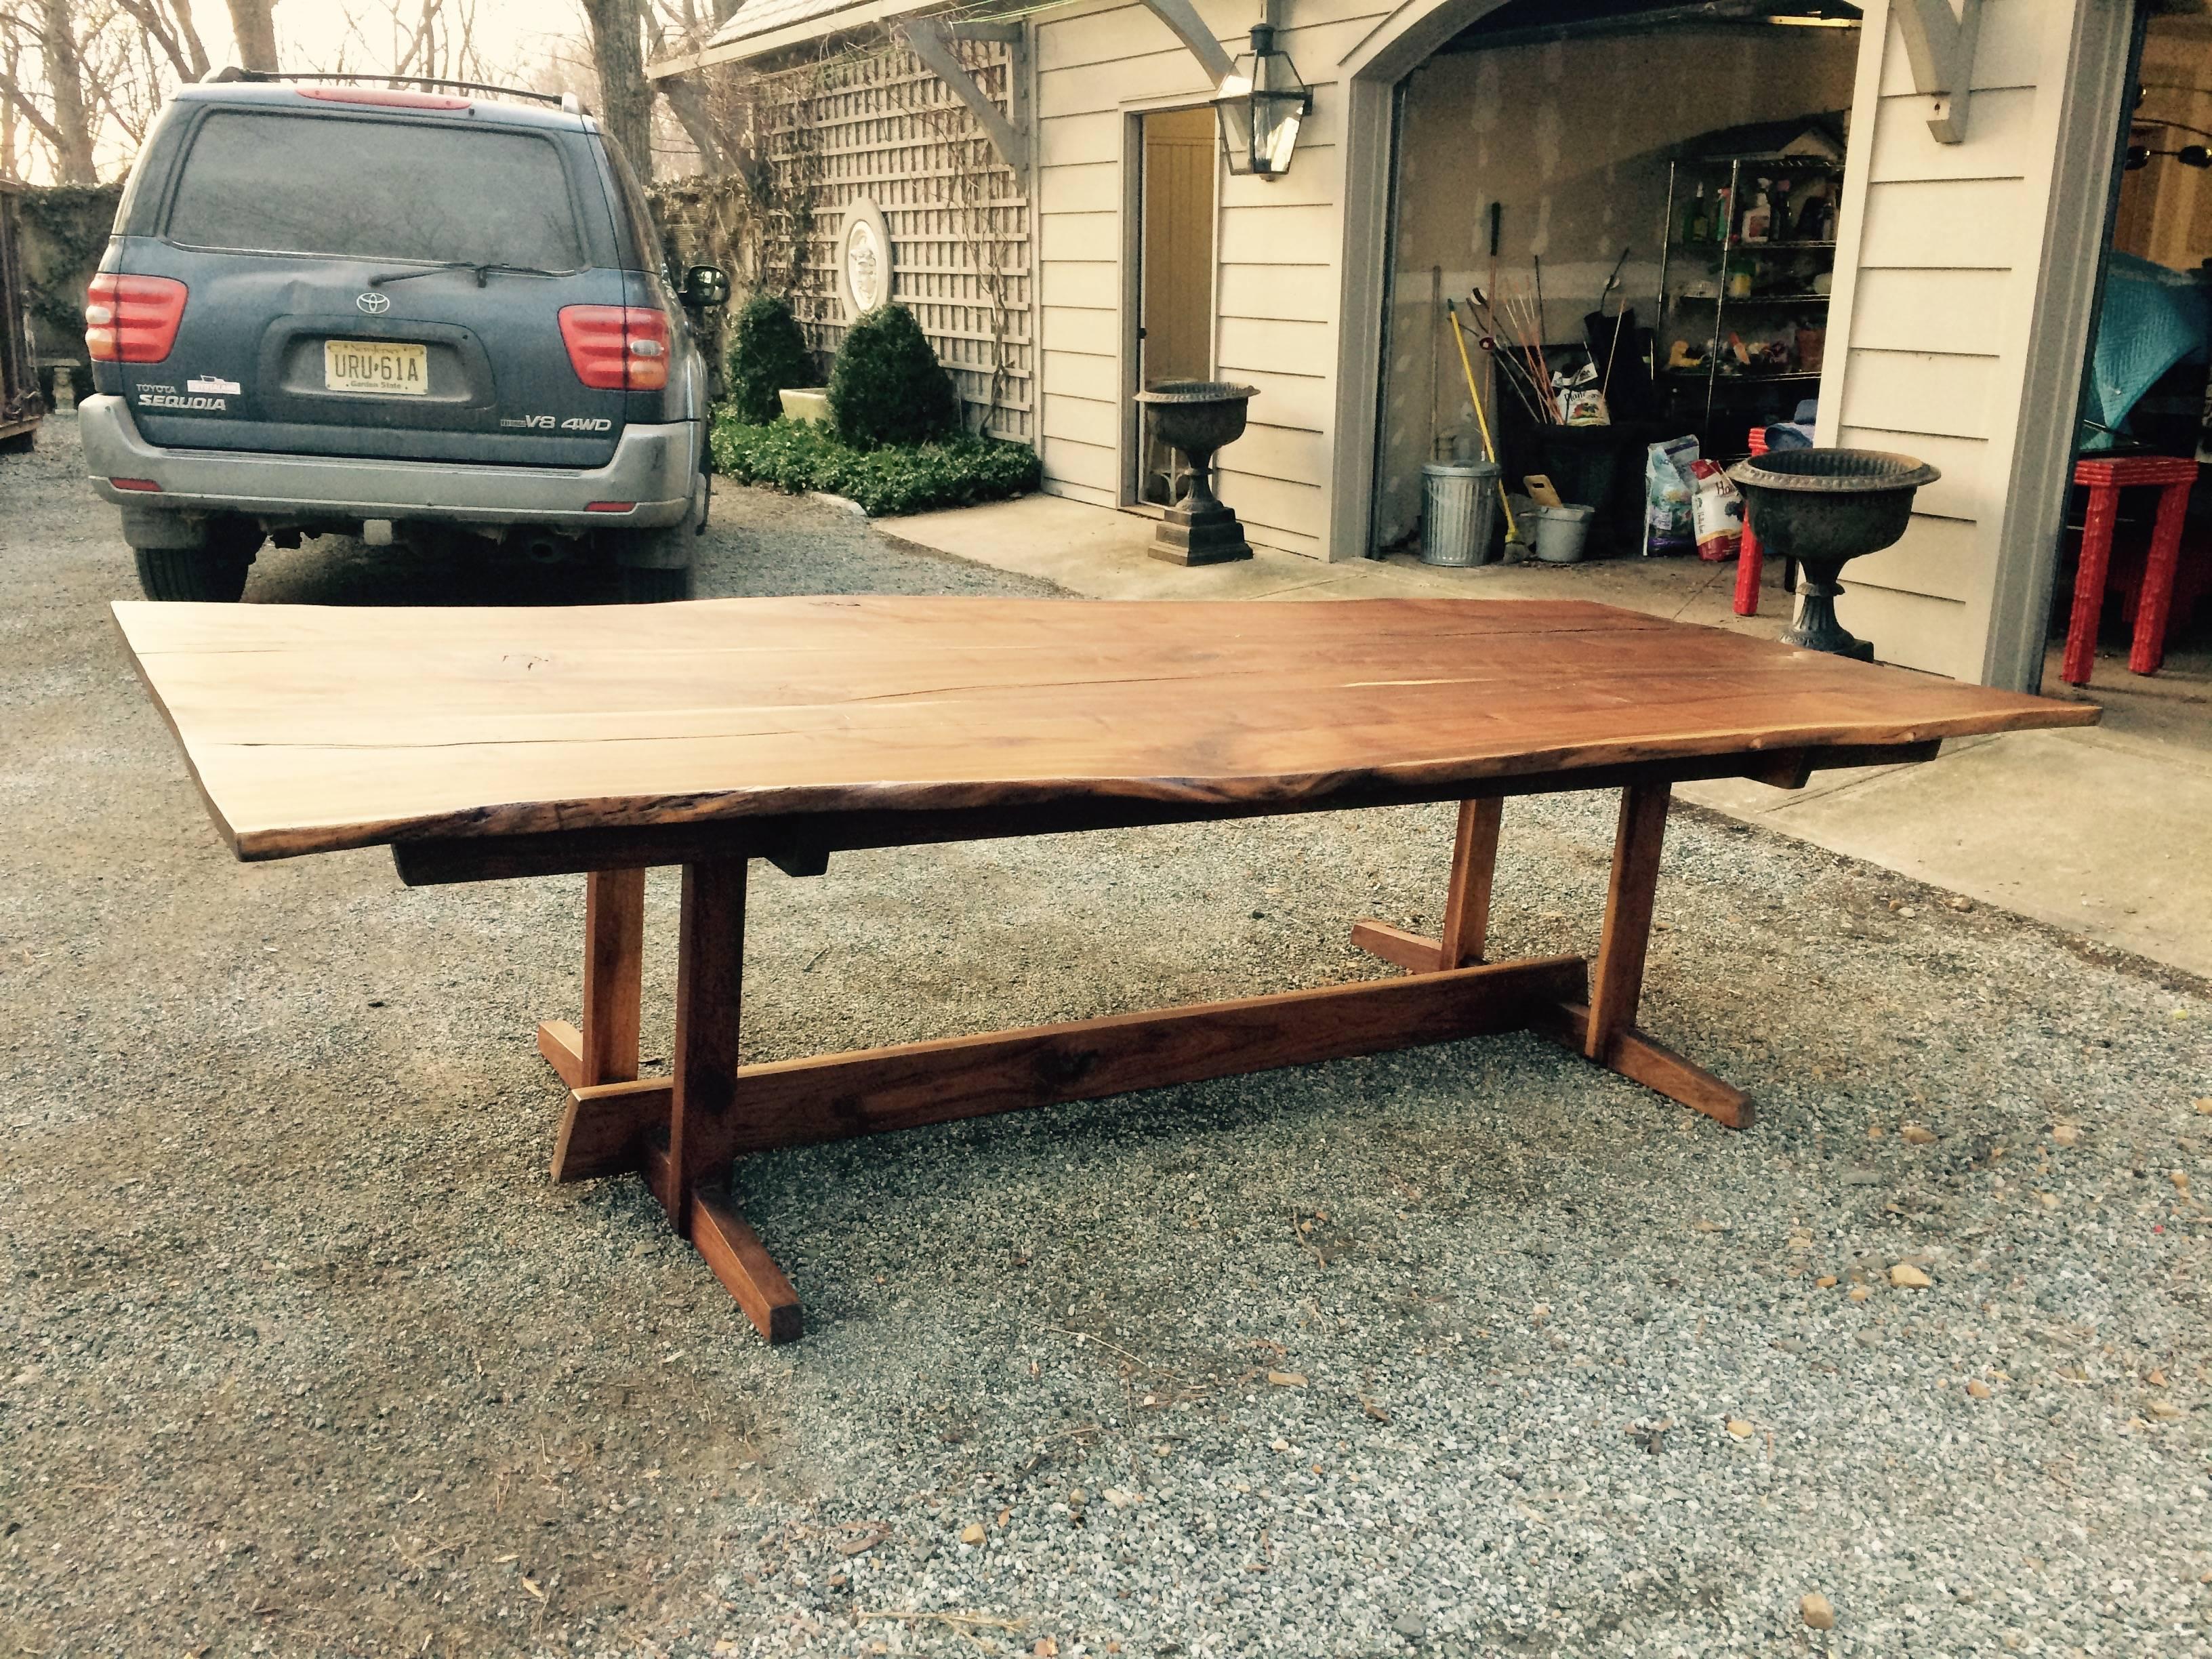 A magnificent 10 foot long finely figured walnut dining table handcrafted as a custom commission by Dean Perkins of Tree Spirit Tables, with sinuous live edge slab tabletop on elegantly proportioned trestle base. Marked with Tree Spirit Tables brand